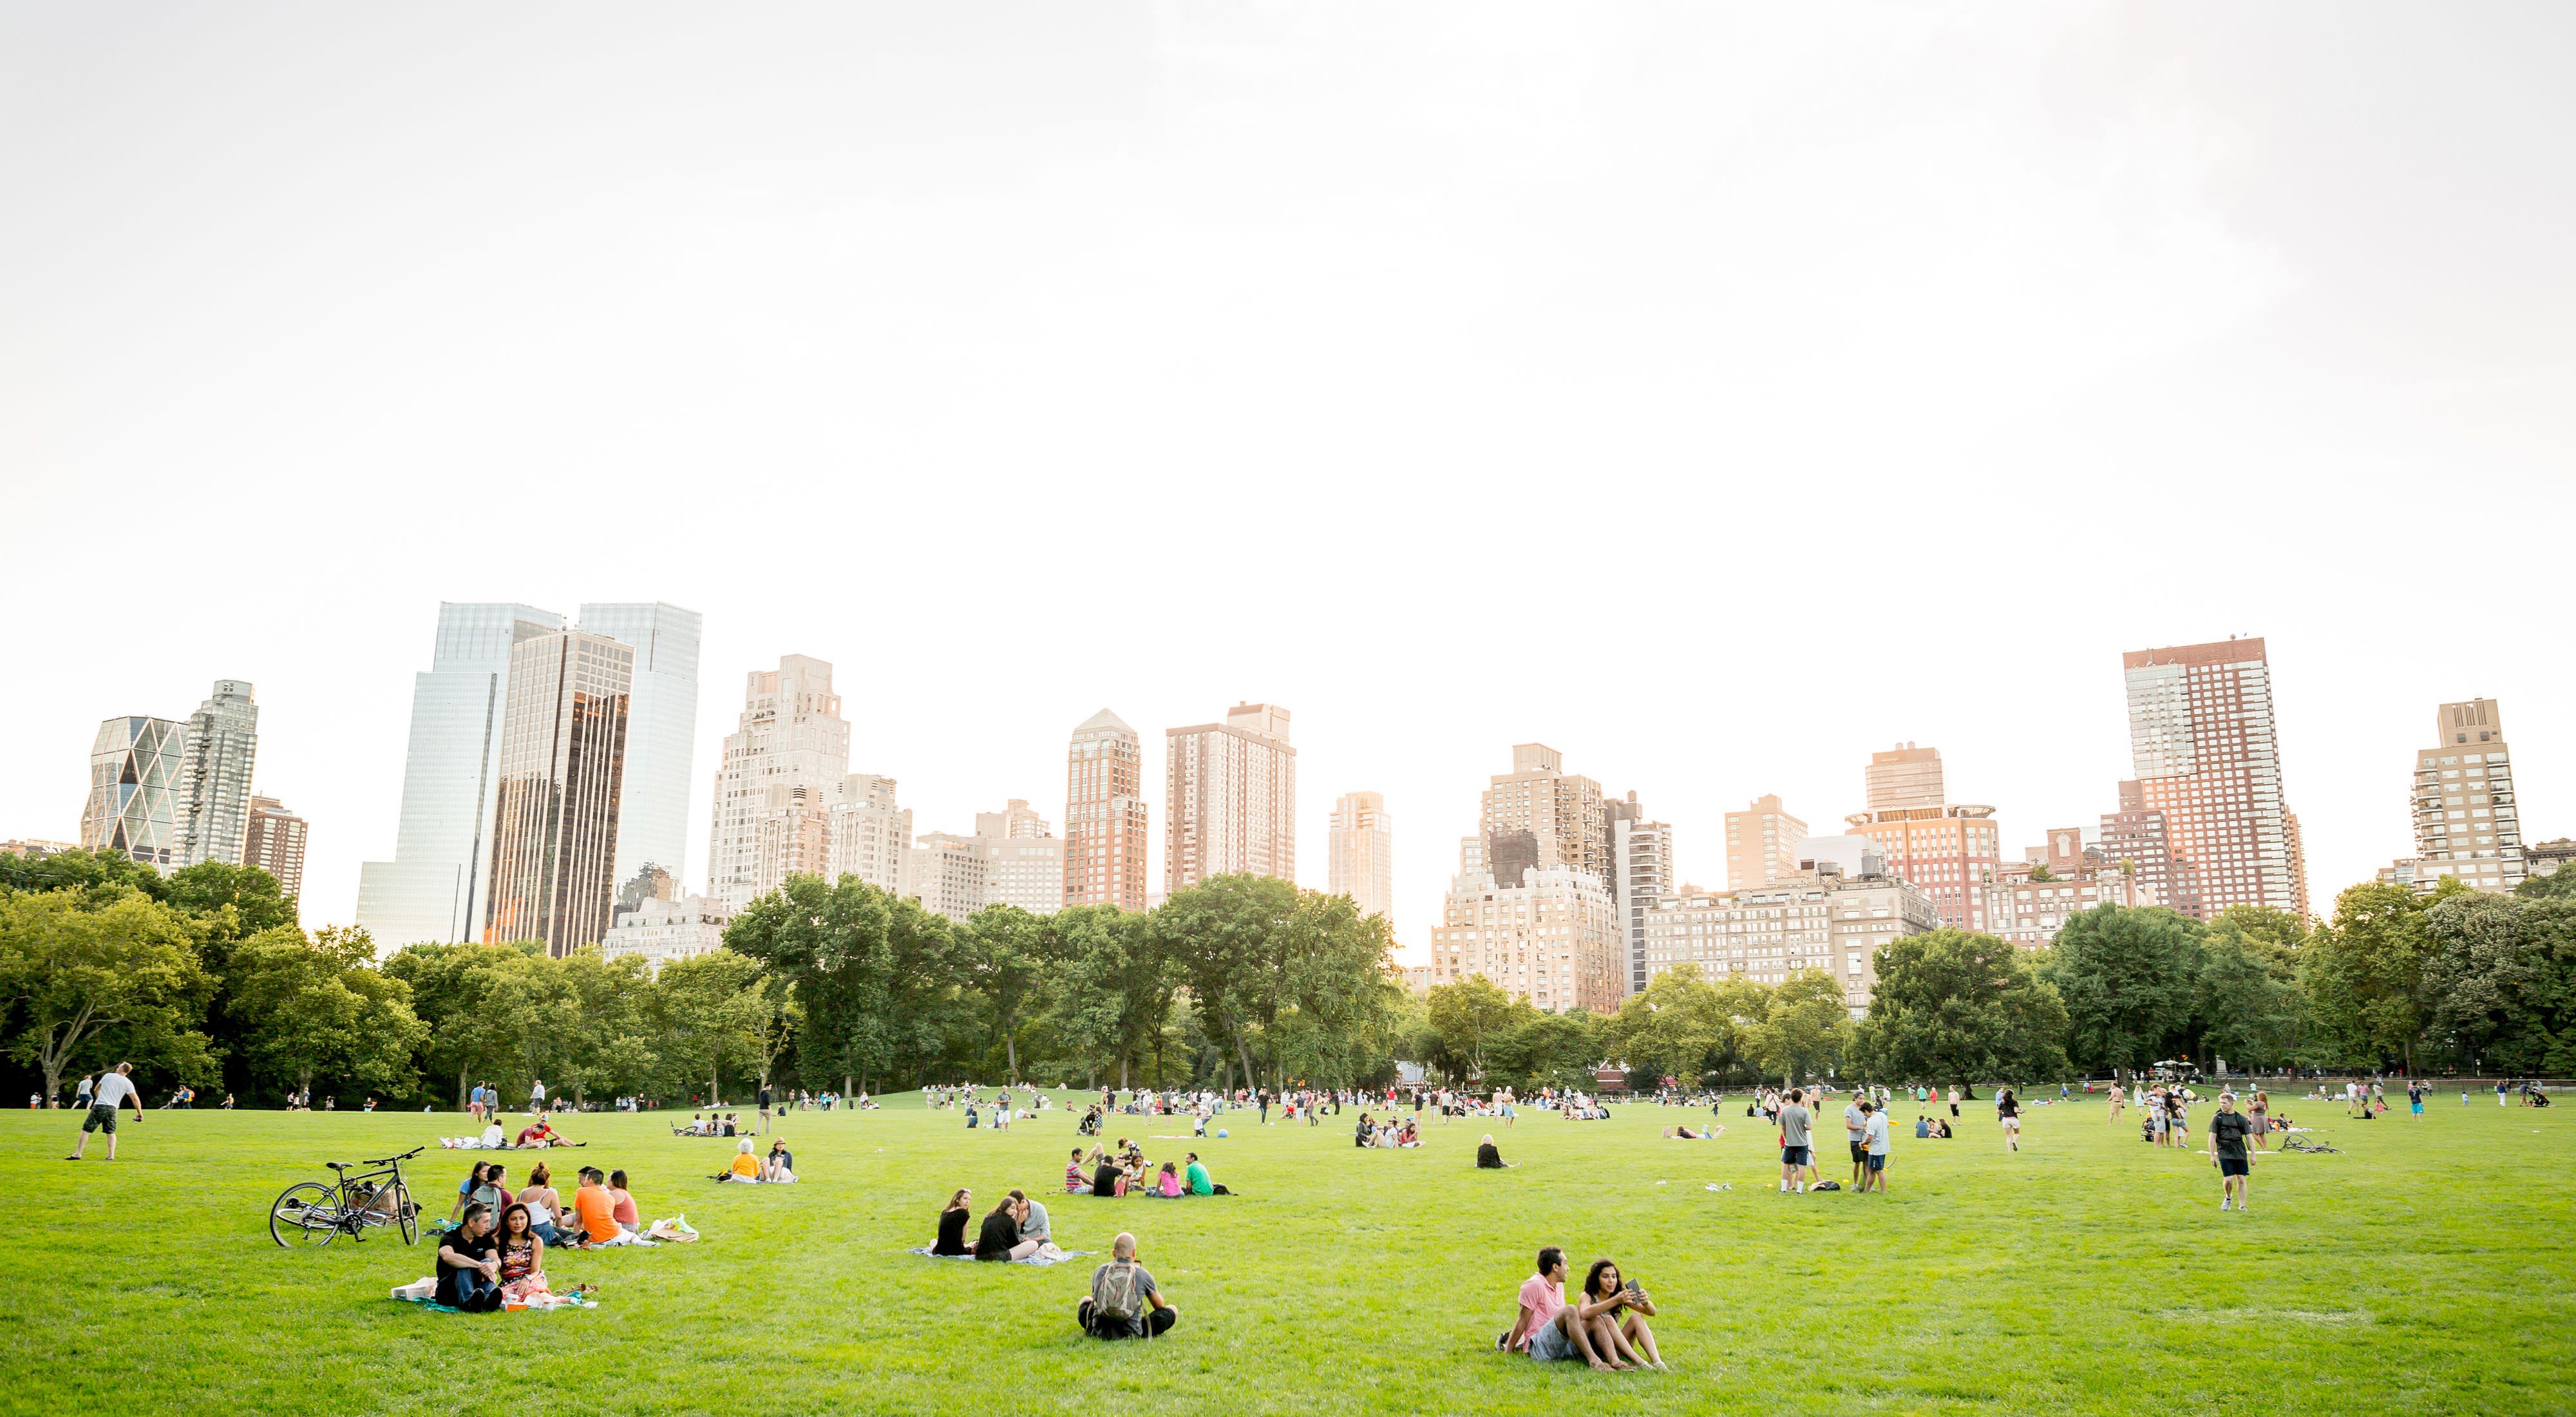 People relaxing in a grassy area at a city park with skyscrapers in the background.